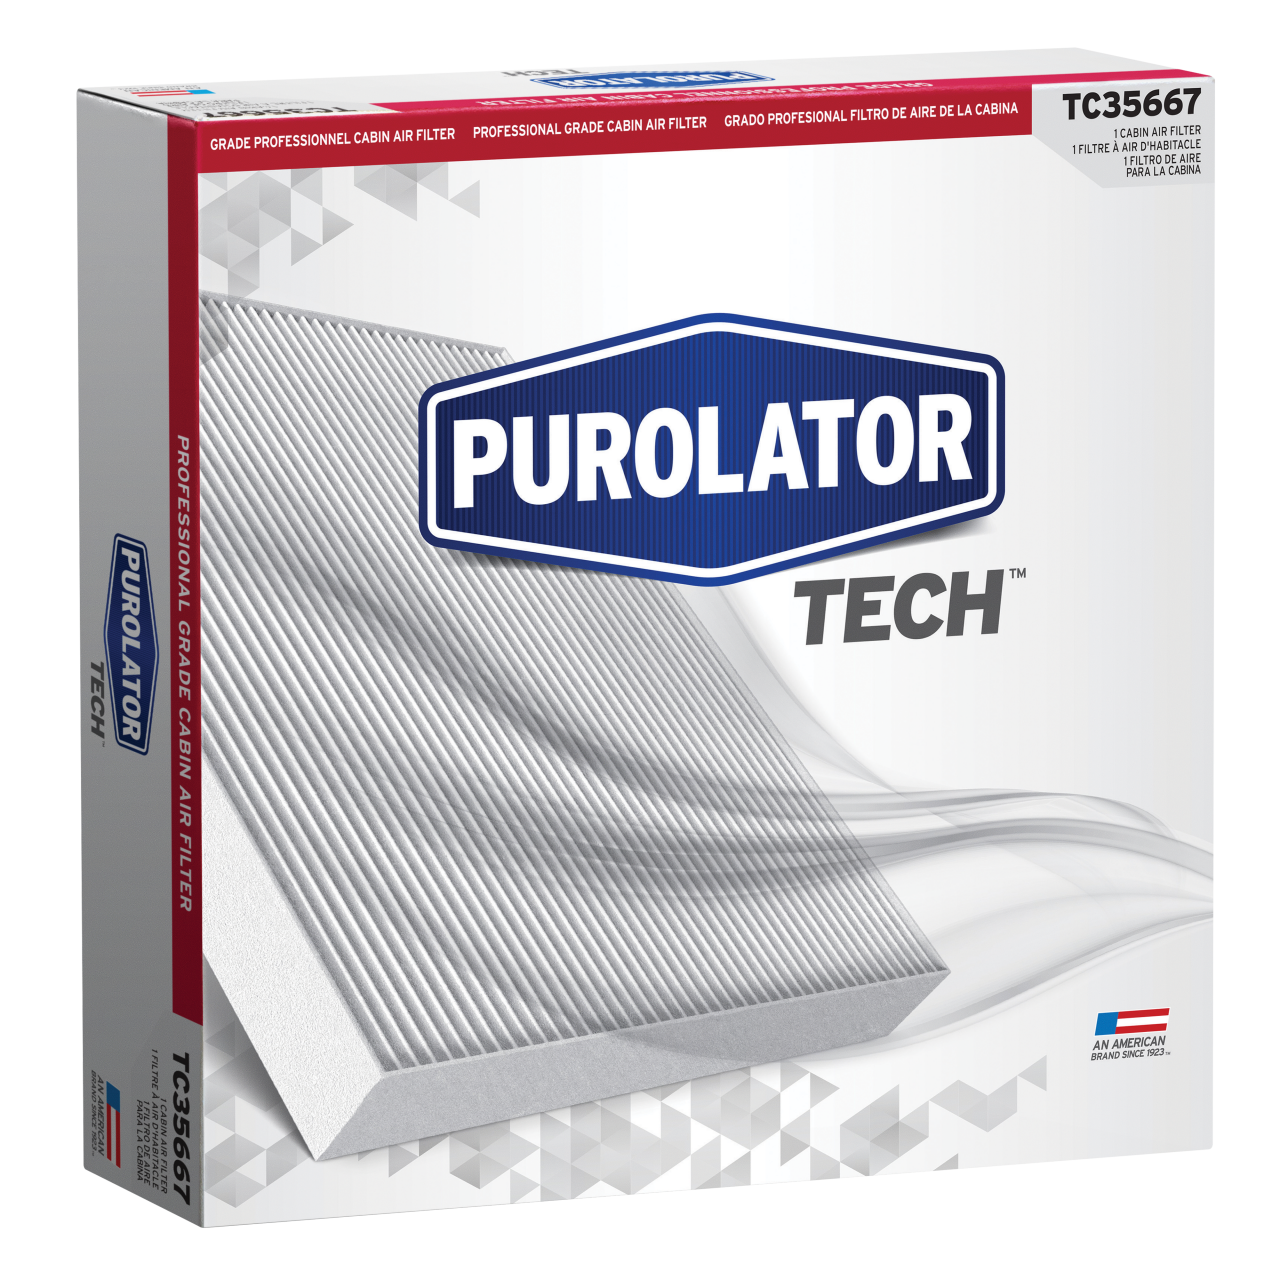 PurolatorTECH™ Cabin Air Filters improve overall driving comfort, encourage better vehicle airflow and aid in defroster performance.